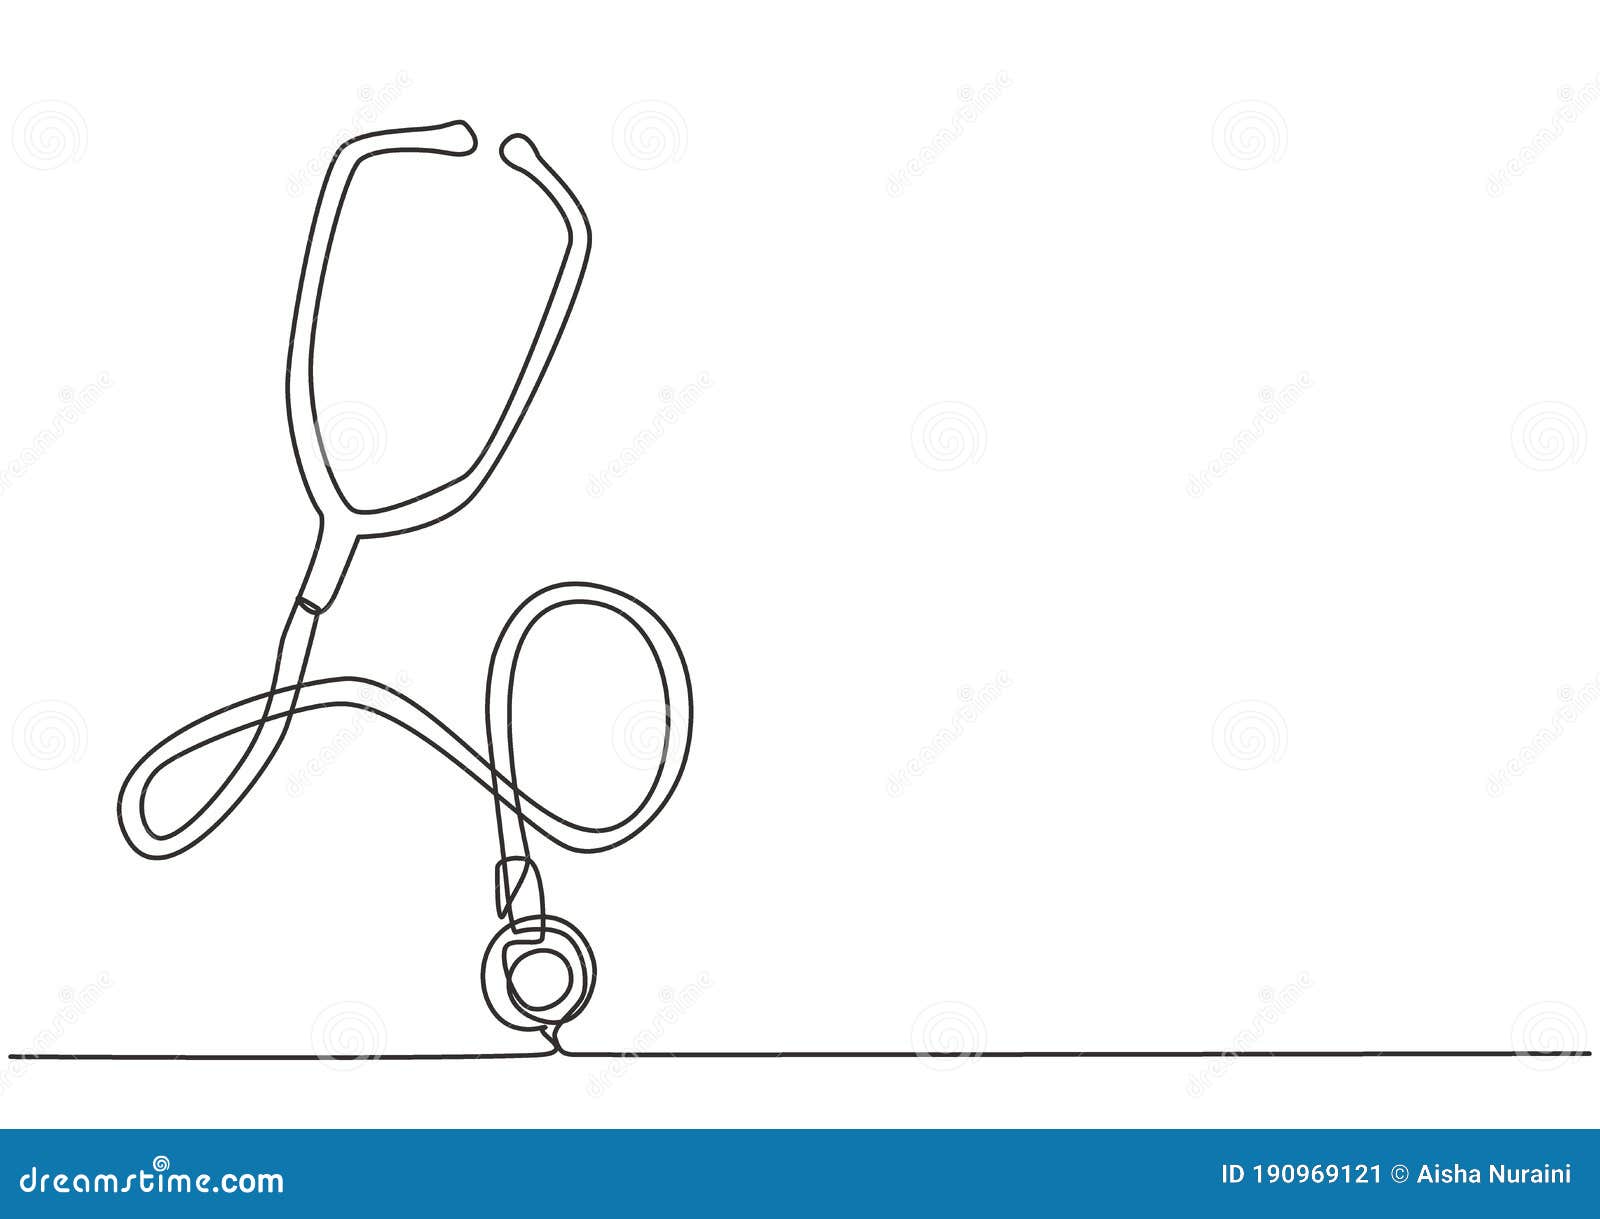 One Single Line Drawing Of Stethoscope, Equipment For